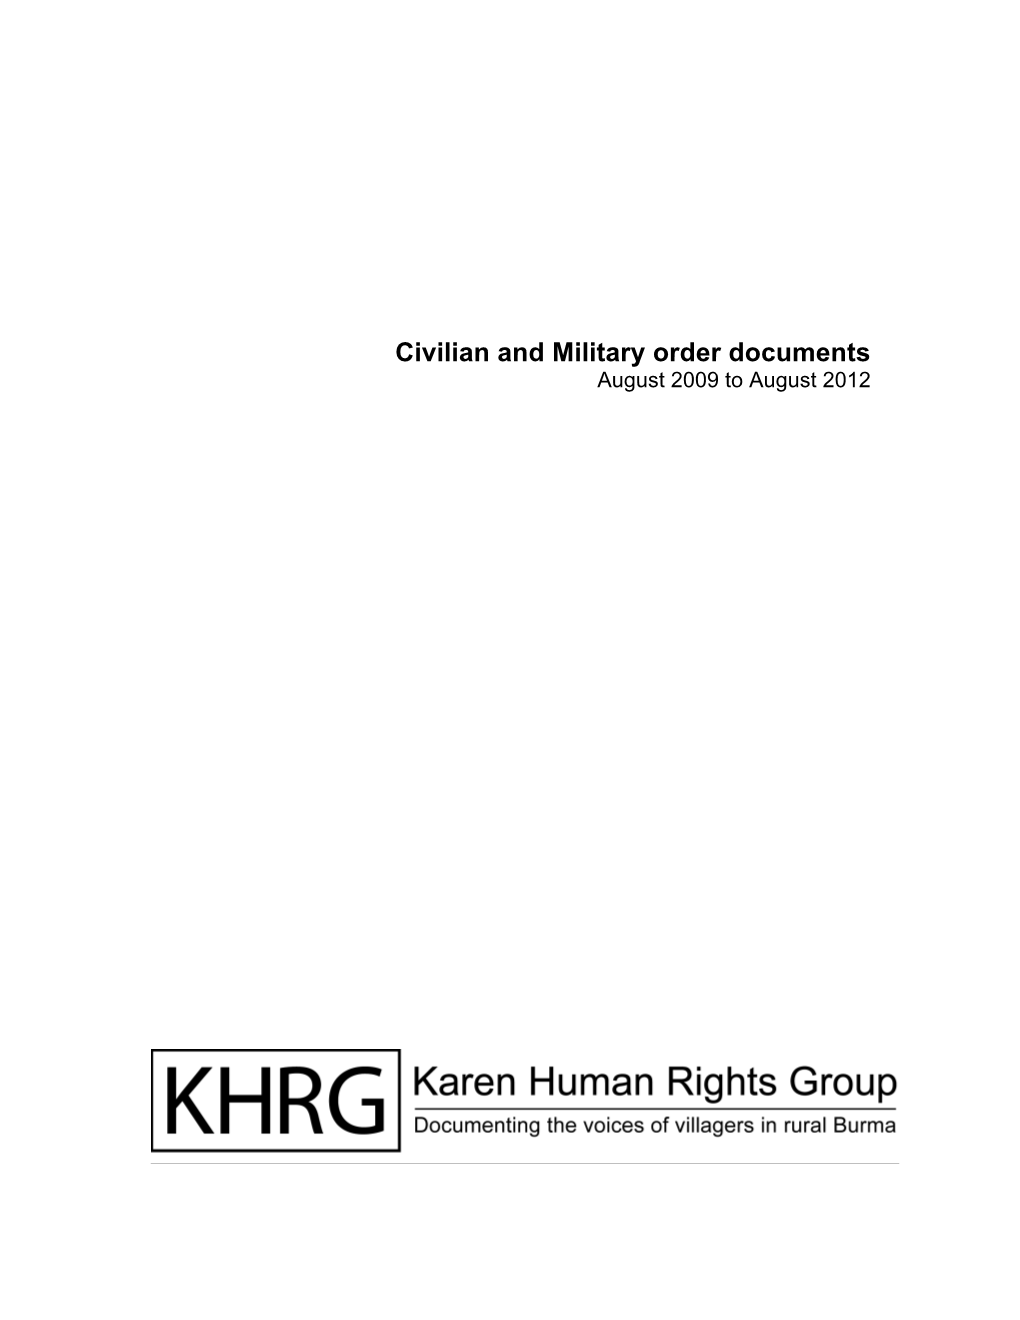 Civilian and Military Order Documents August 2009 to August 2012